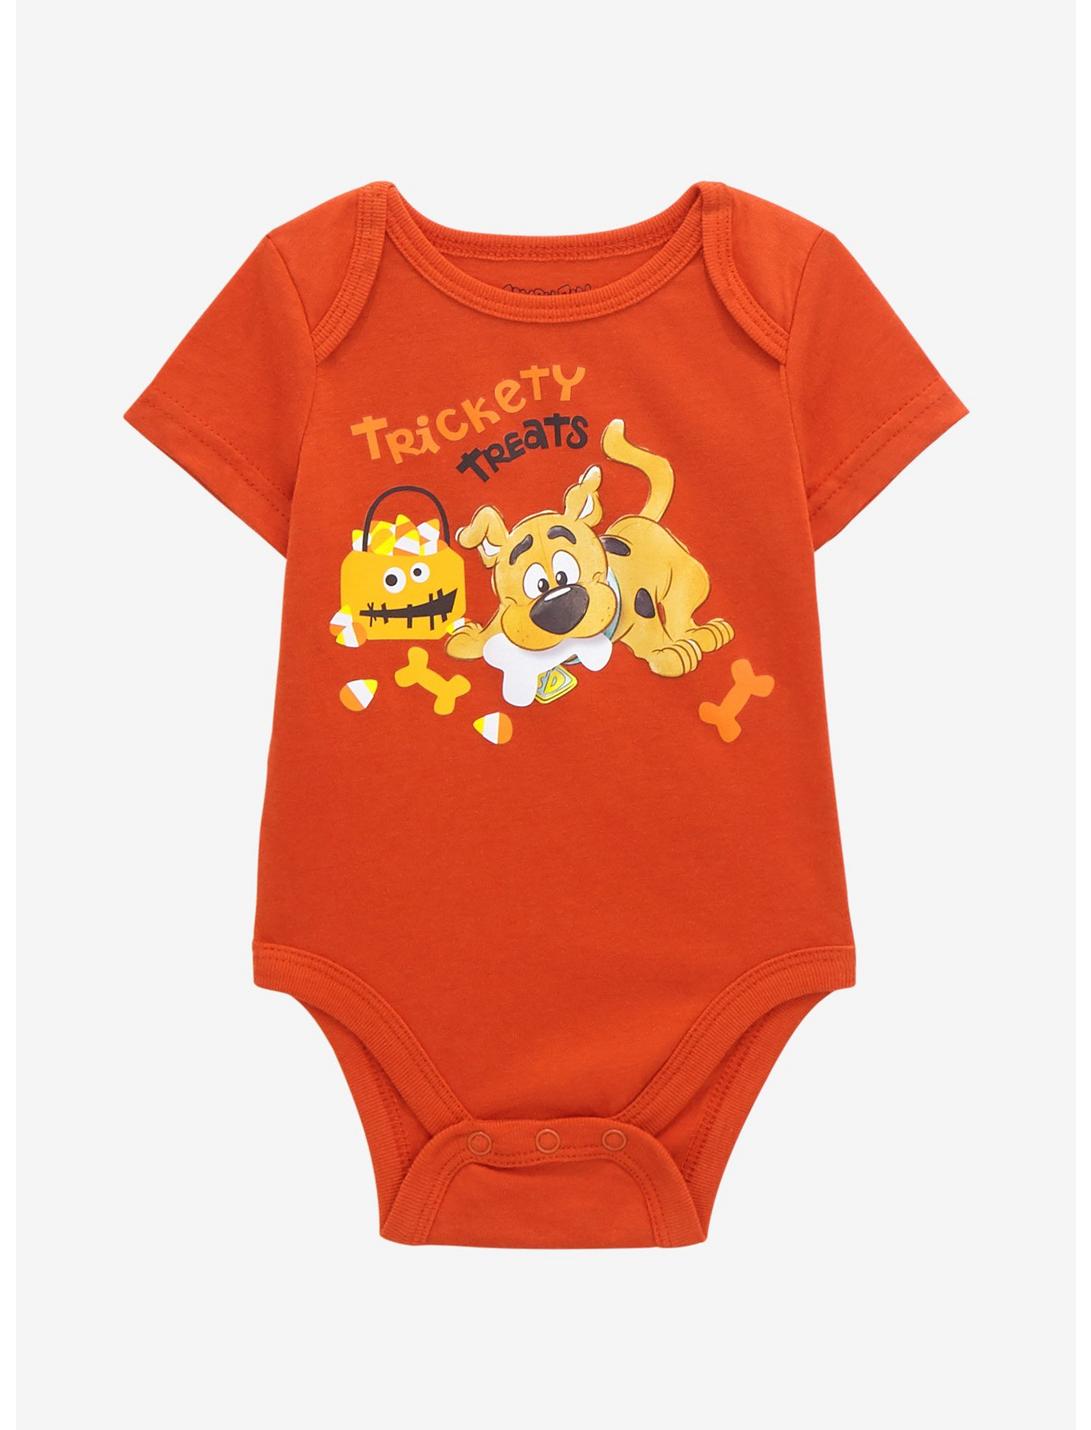 Scooby-Doo Trickety Treats Infant One-Piece - BoxLunch Exclusive, BURNT ORANGE, hi-res